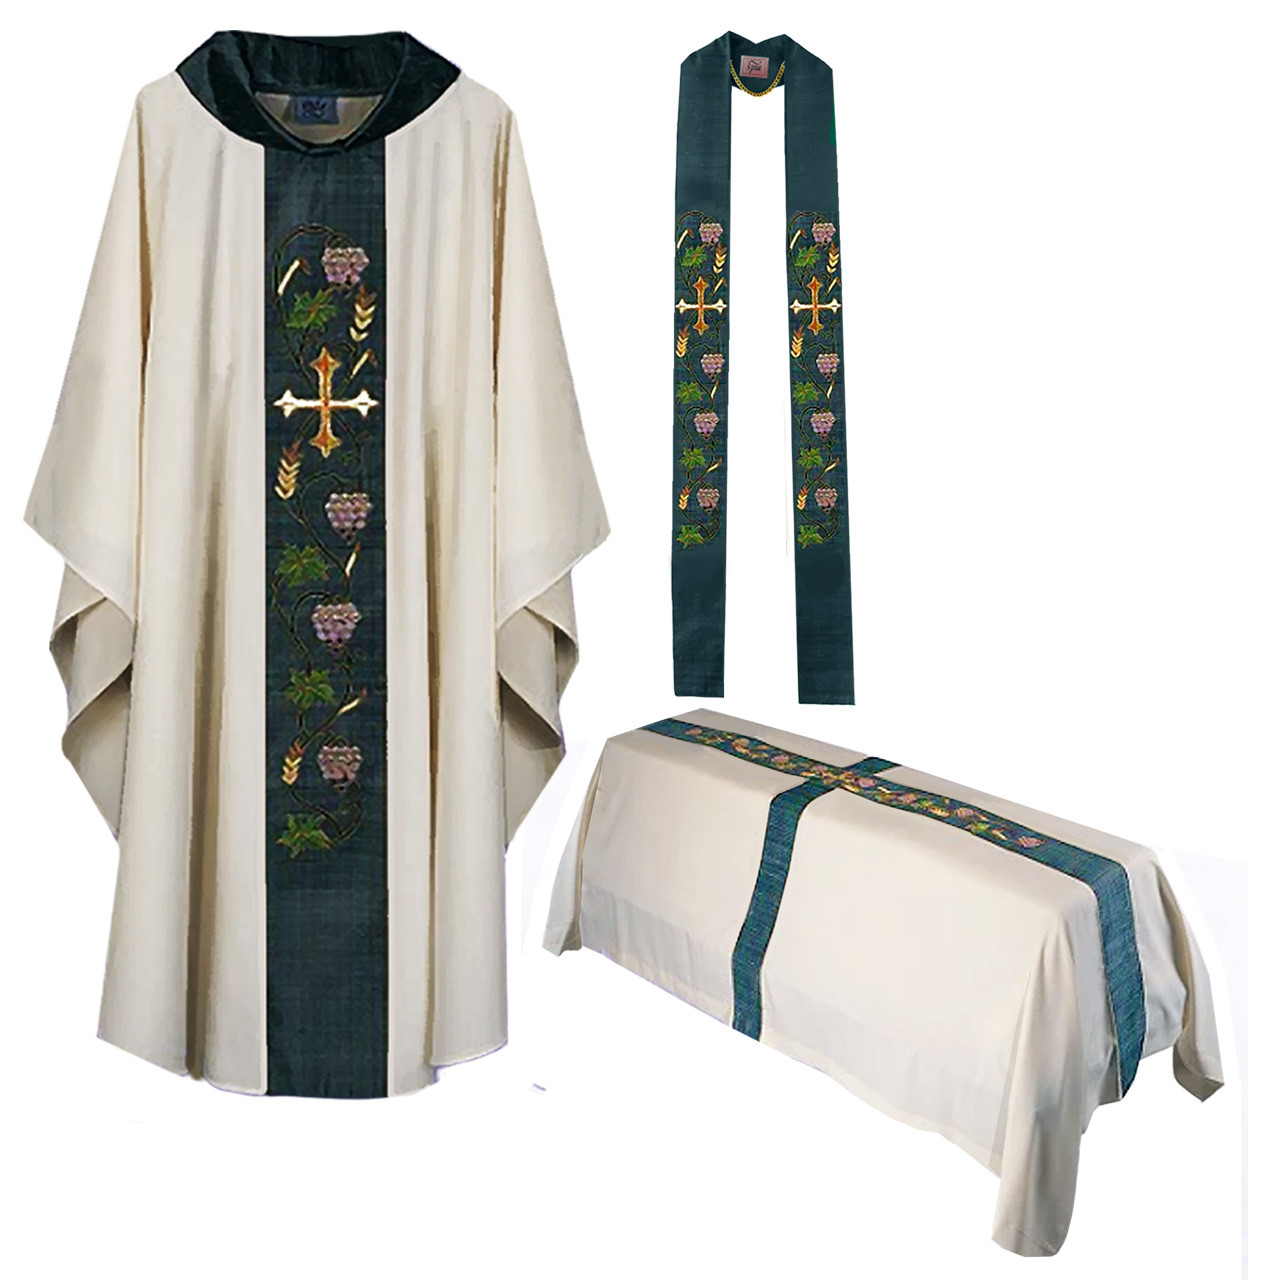 HB135 Matching Funeral Chasuble set